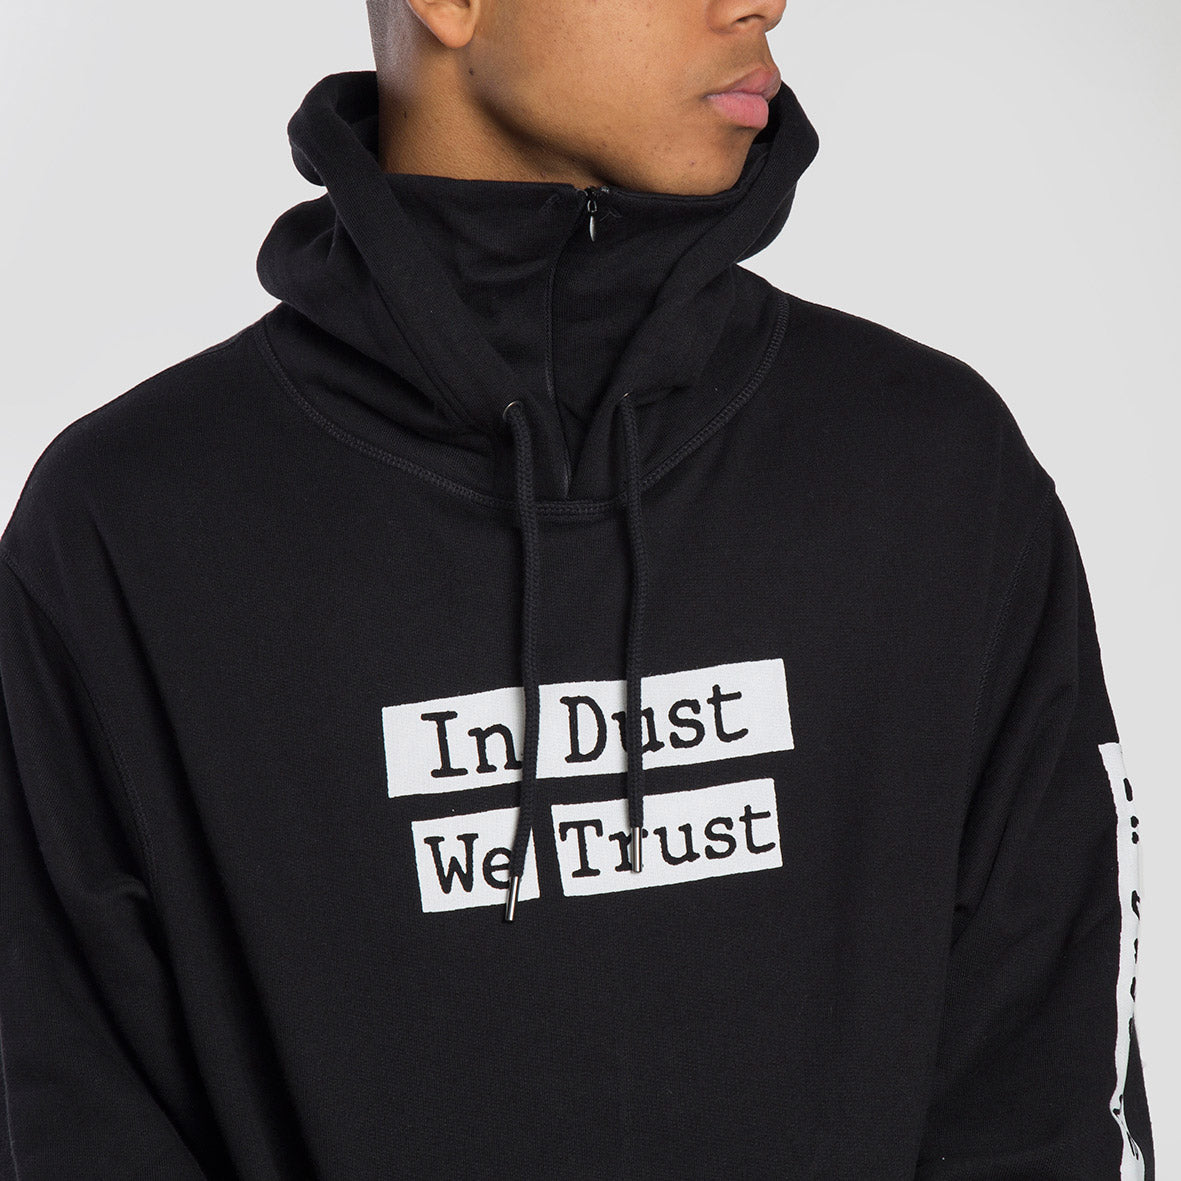 Wasted Paris Sudadera In Dust We Trust - WP-SS21-IN DUST - Colección Chico